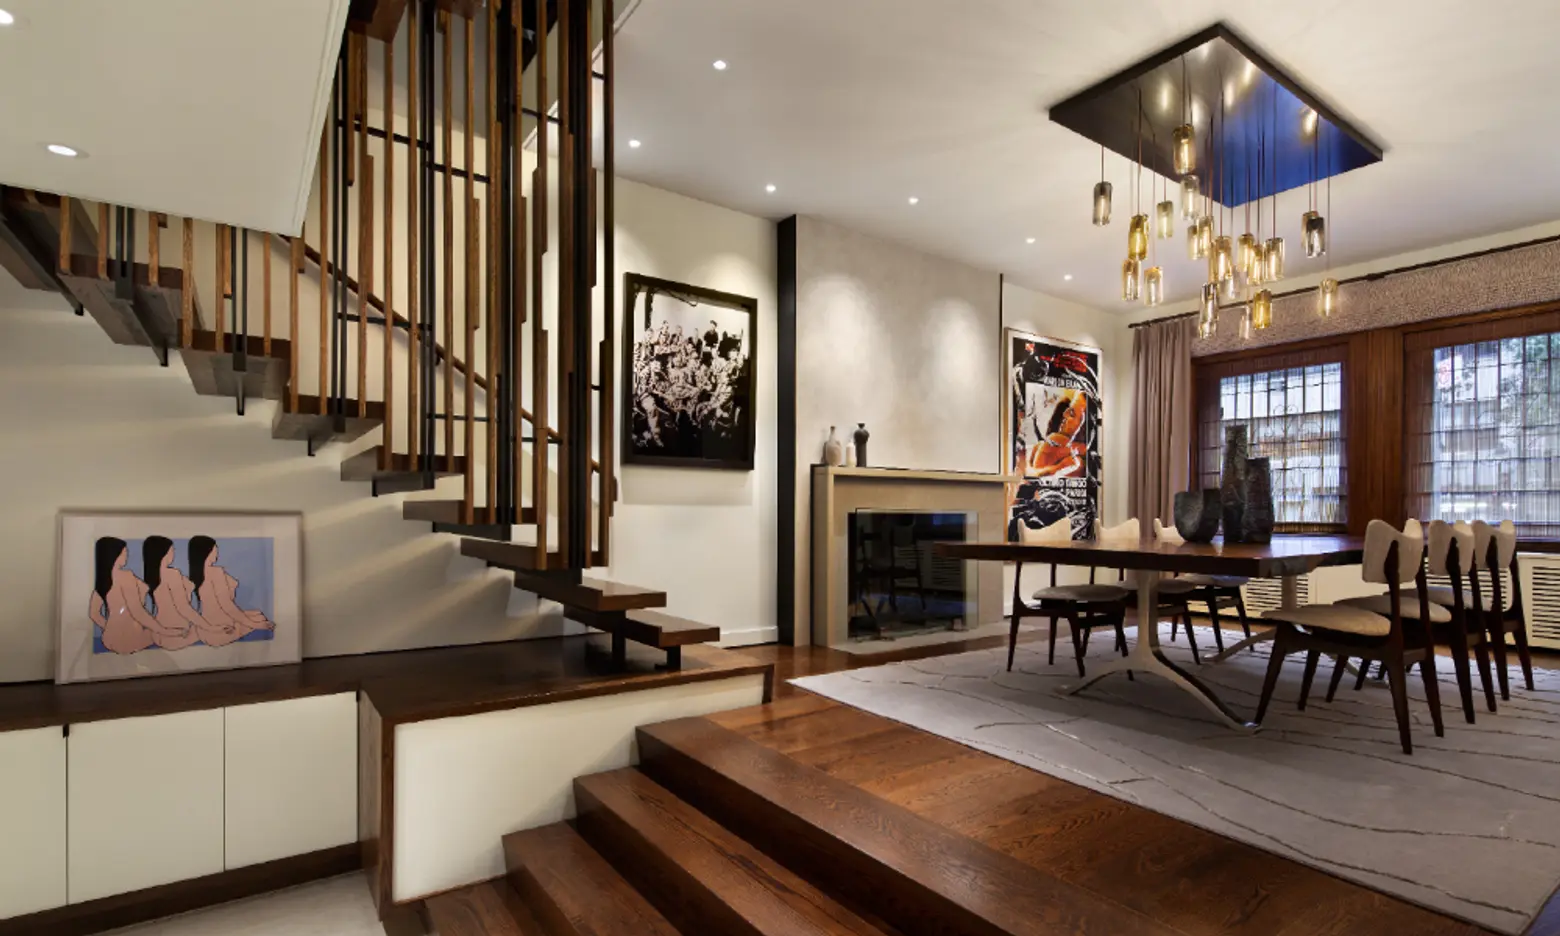 Spliced Townhouse in Upper East Side designed by LTL Architects